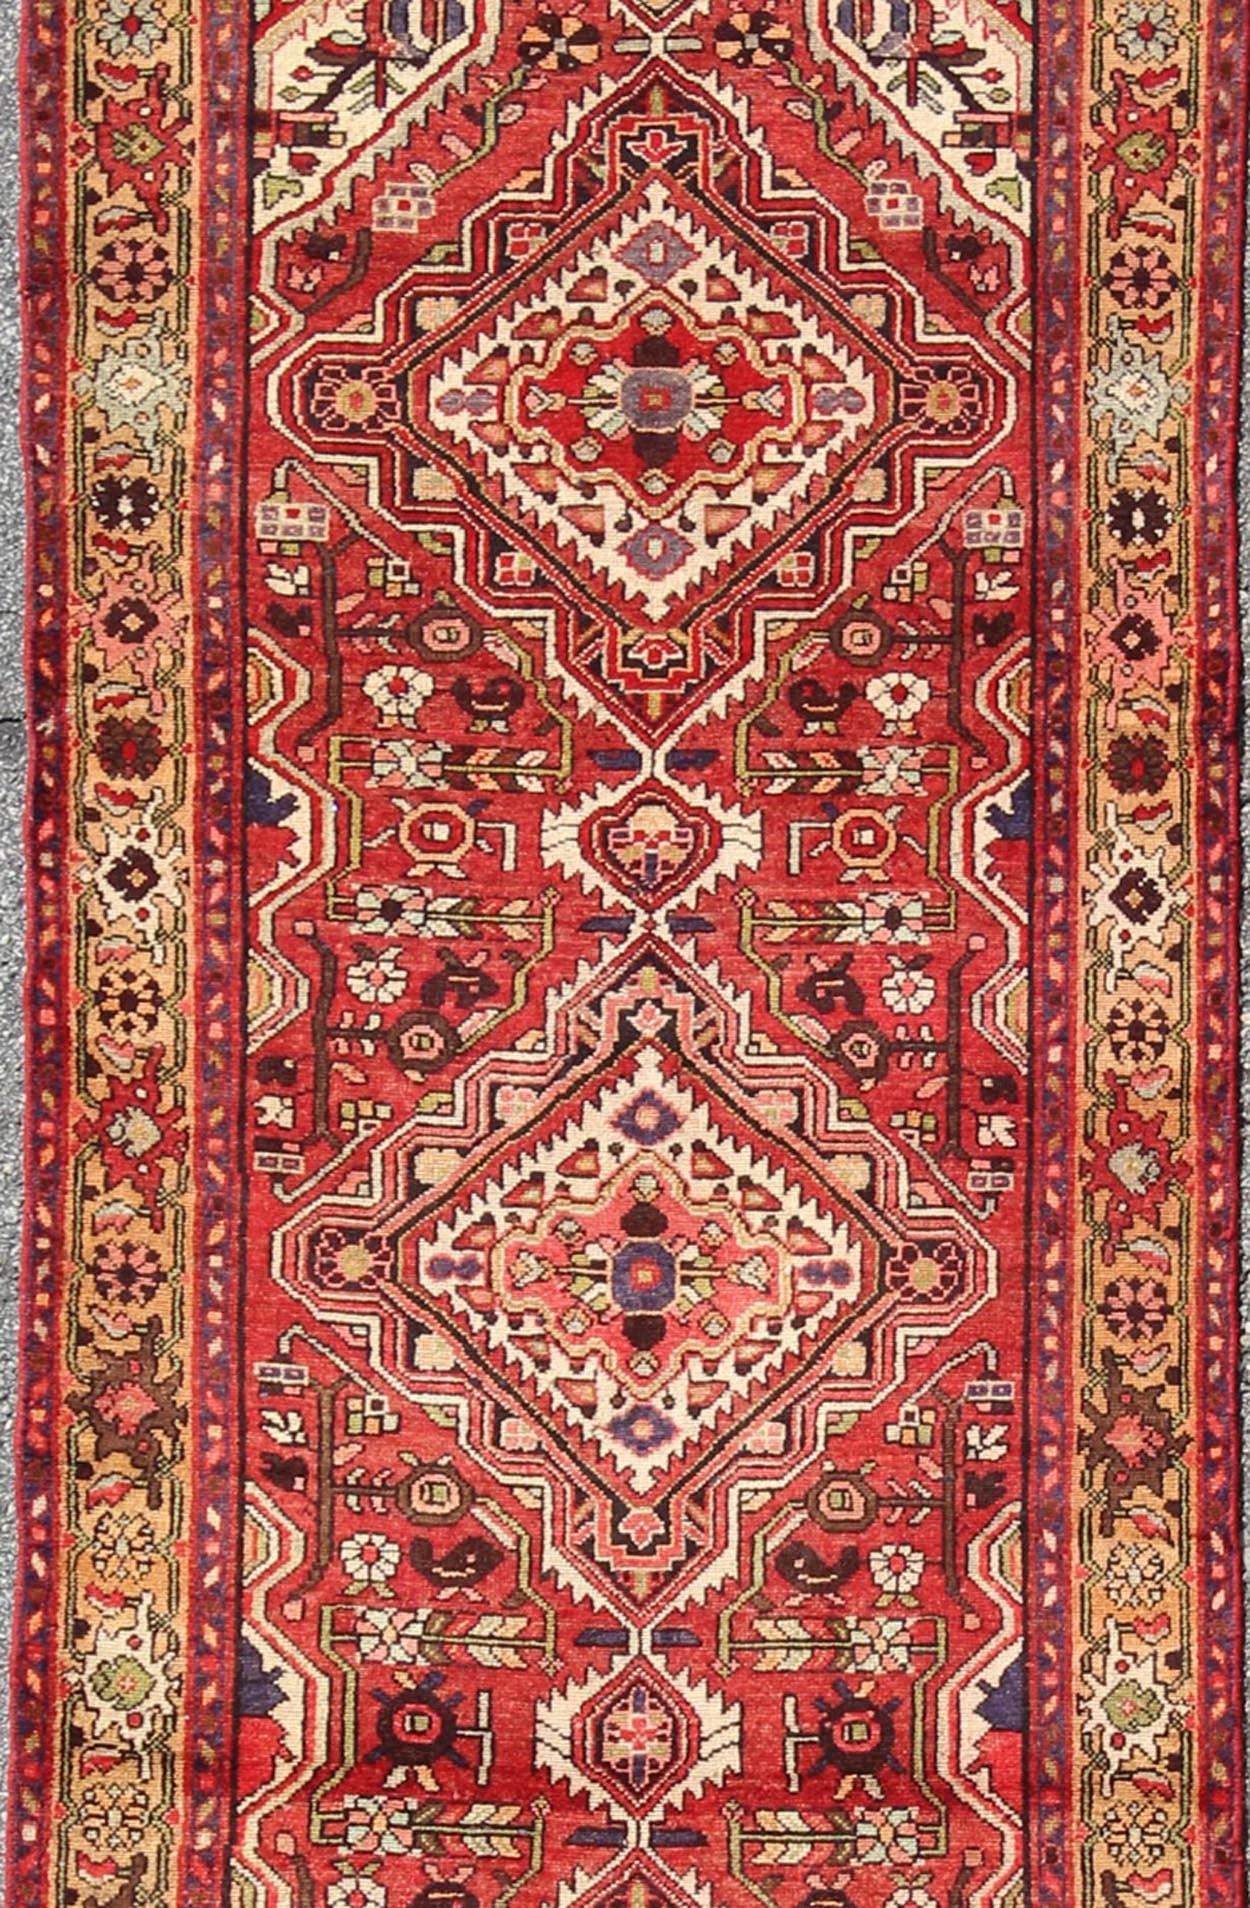 Sub-geometric floral design antique Malayer runner in gorgeous red, khaki, green blue and black highlights, rug H-711-08, country of origin / type: Malayer, circa 1930.

This beautiful antique Malayer runner (circa 1930) bears a beautiful,